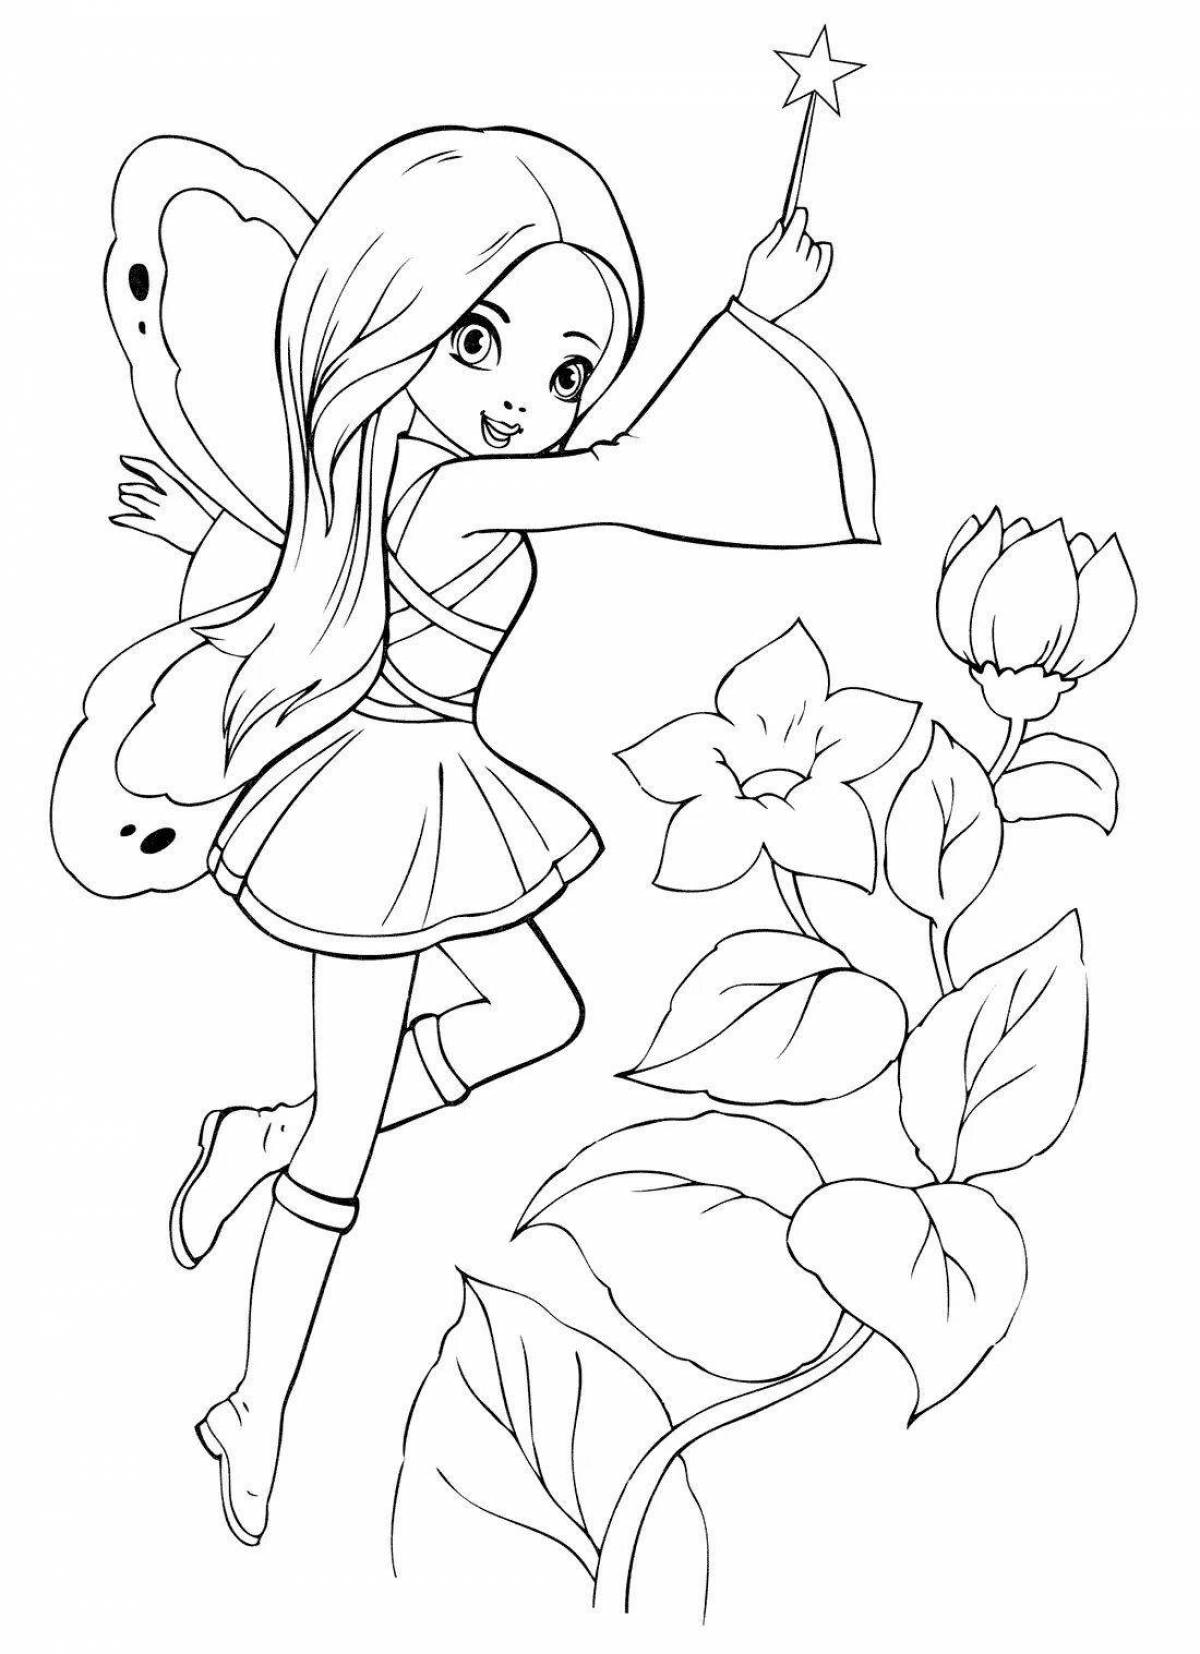 Witty fairy coloring pages for girls